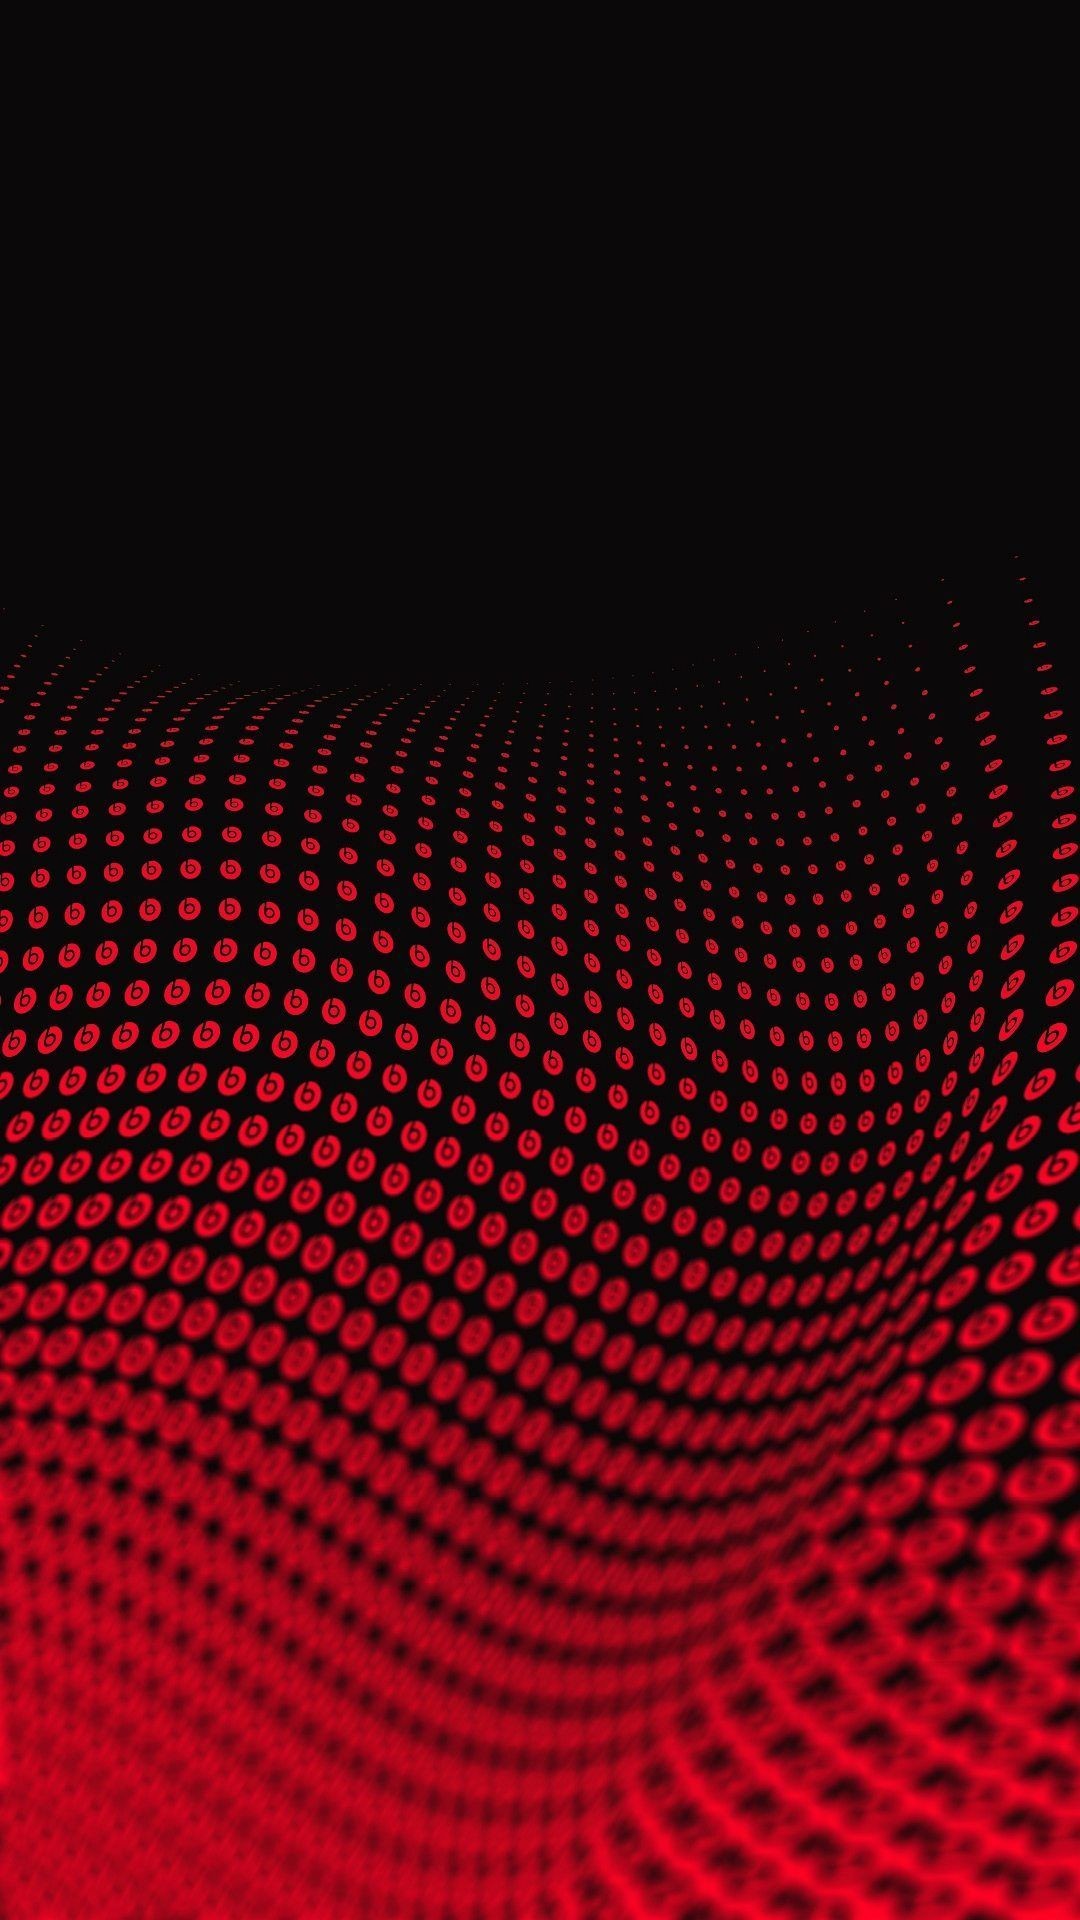 1080x1920 Wallpaper Full Hd 1080 X 1920 Smartphone Red Wave 3d Abstract .